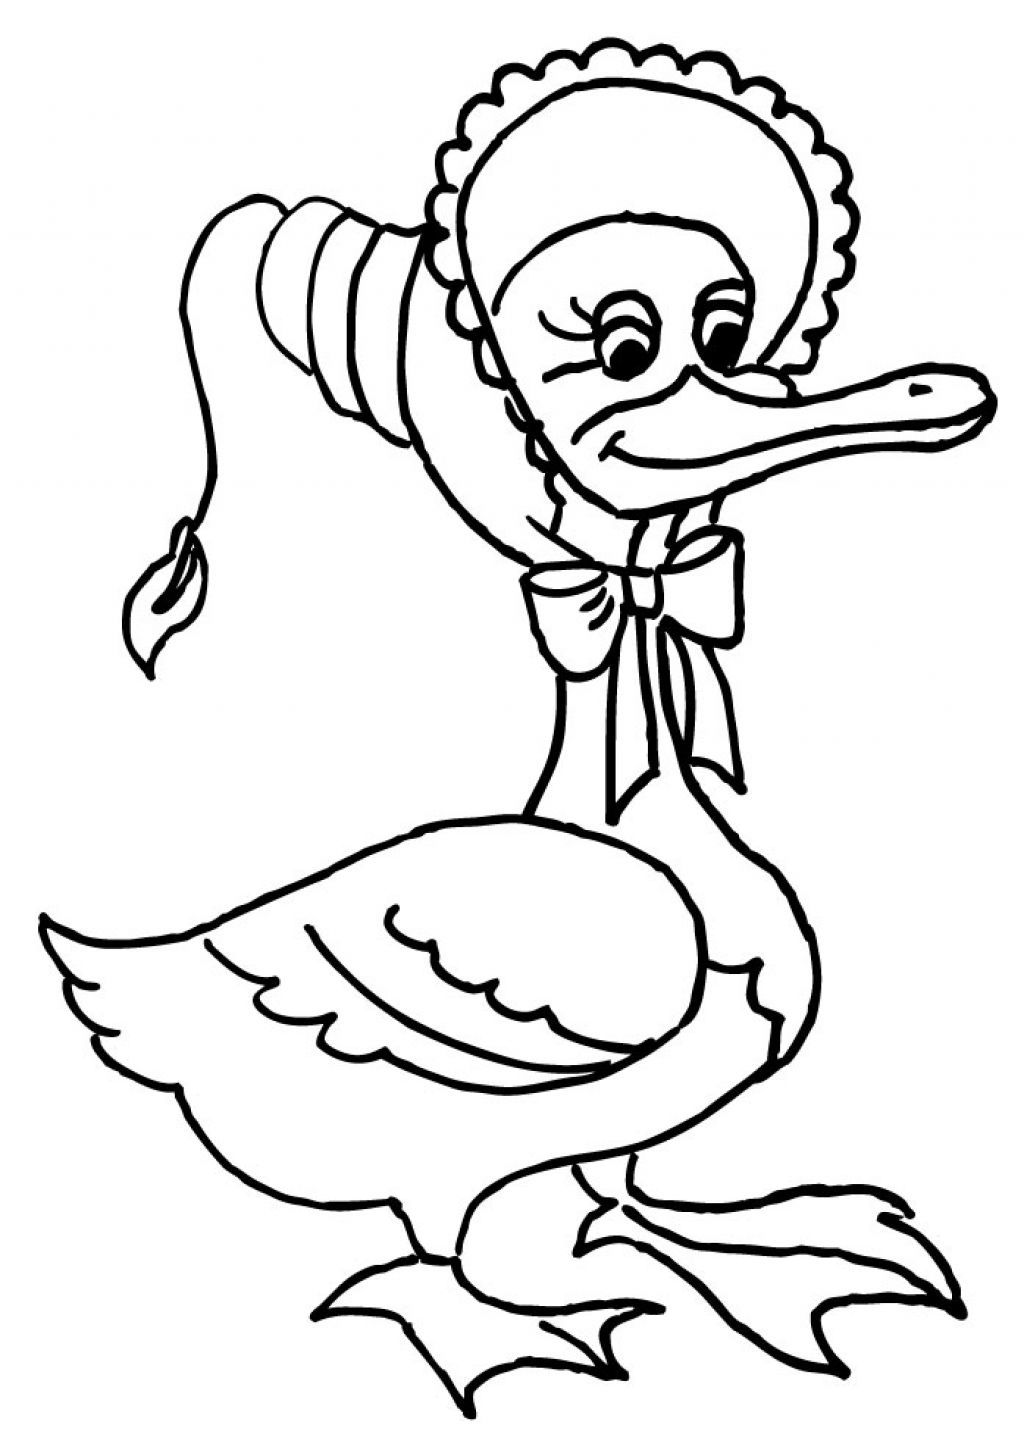 Mother Goose - Coloring Pages for Kids and for Adults